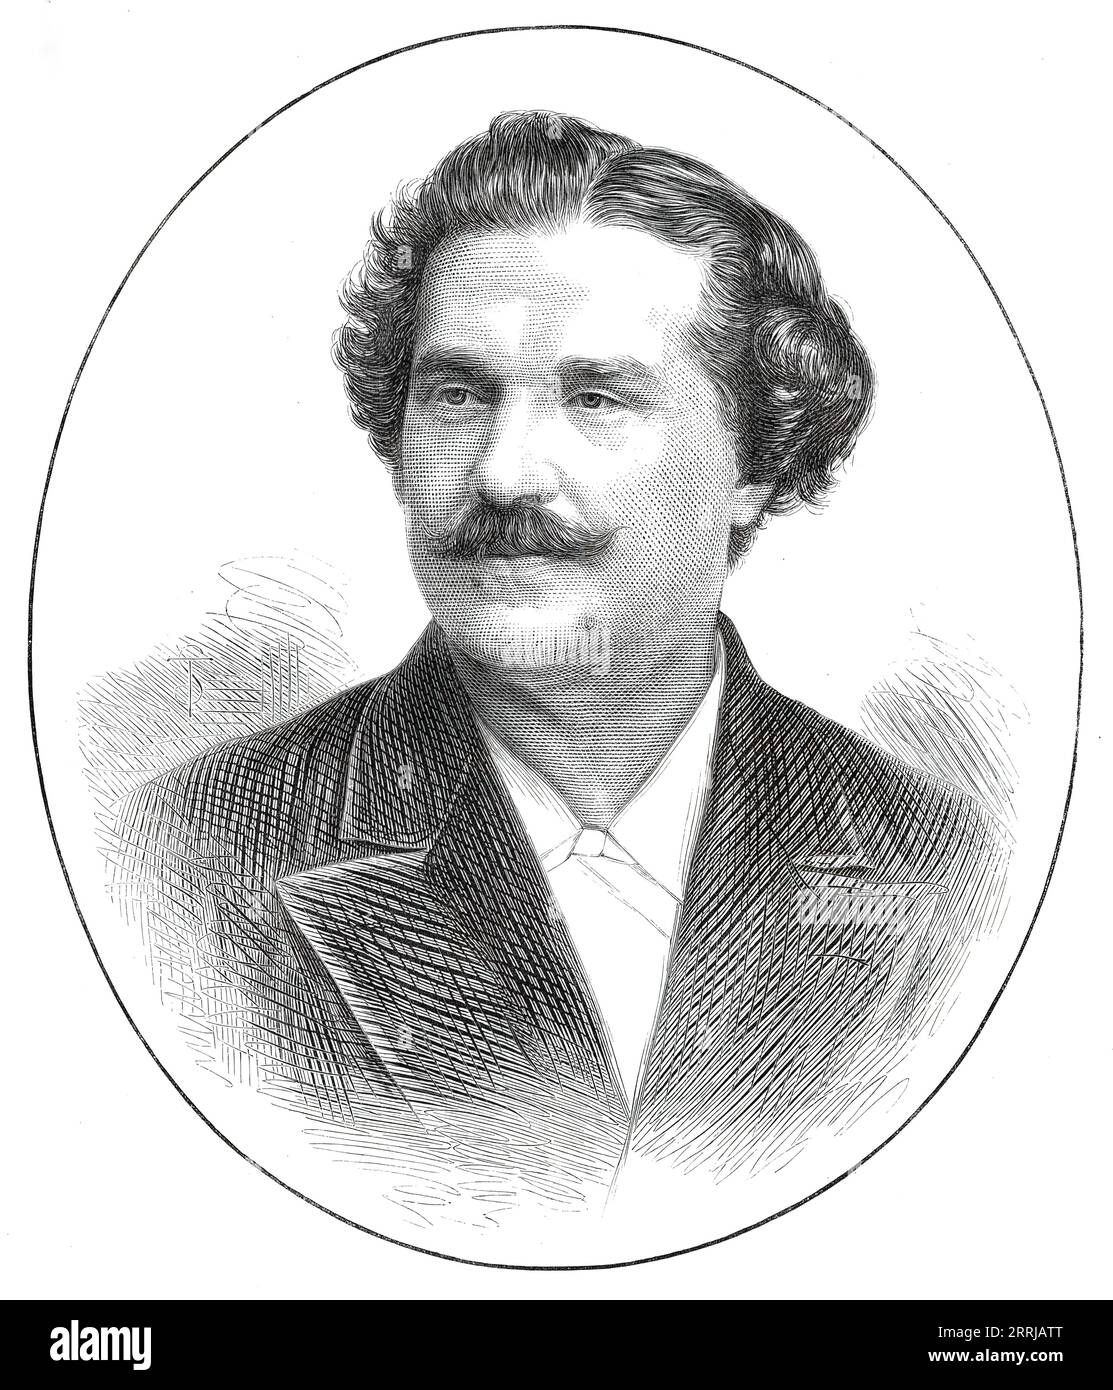 Signor Rossi, the Italian Tragedian, 1876. Engraving from a photograph by Ambrosetti of Turin. 'Ernesto Rossi...a native of Leghorn...ran away from school in his boyhood to go on the stage. After a short apprenticeship in the travelling dramatic company of Signor Marchi, the young actor entered the school of Modena, and in 1847 made his first regular debut at the Milan Teatro Carcano. From 1848 to 1852 Rossi travelled about in Italy with a company of his own...[He] attempted to introduce Shakspeare [sic] to the Italians. His &quot;Othello&quot; was followed by &quot;King Lear,&quot; &quot;Rome Stock Photo